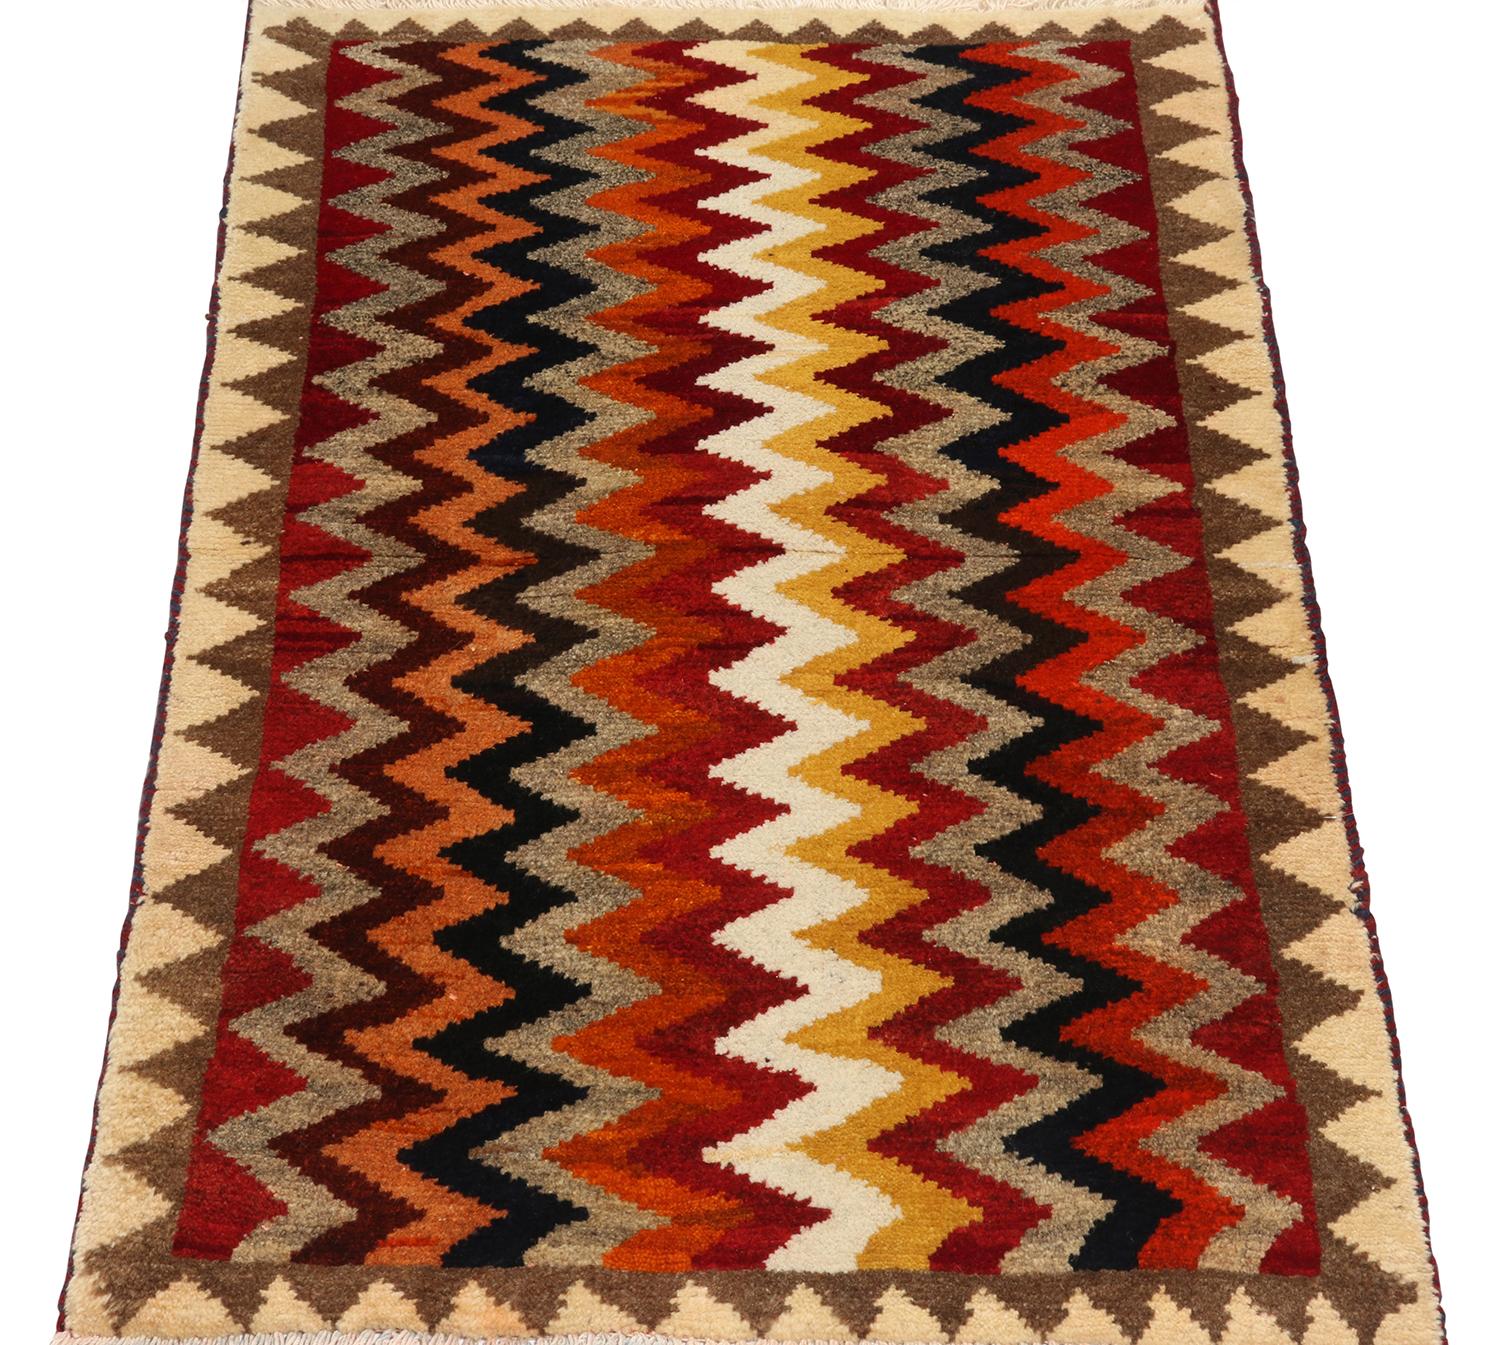 Turkish Vintage Gabbeh Persian Tribal Rug in Vibrant Chevron Patterns by Rug & Kilim For Sale